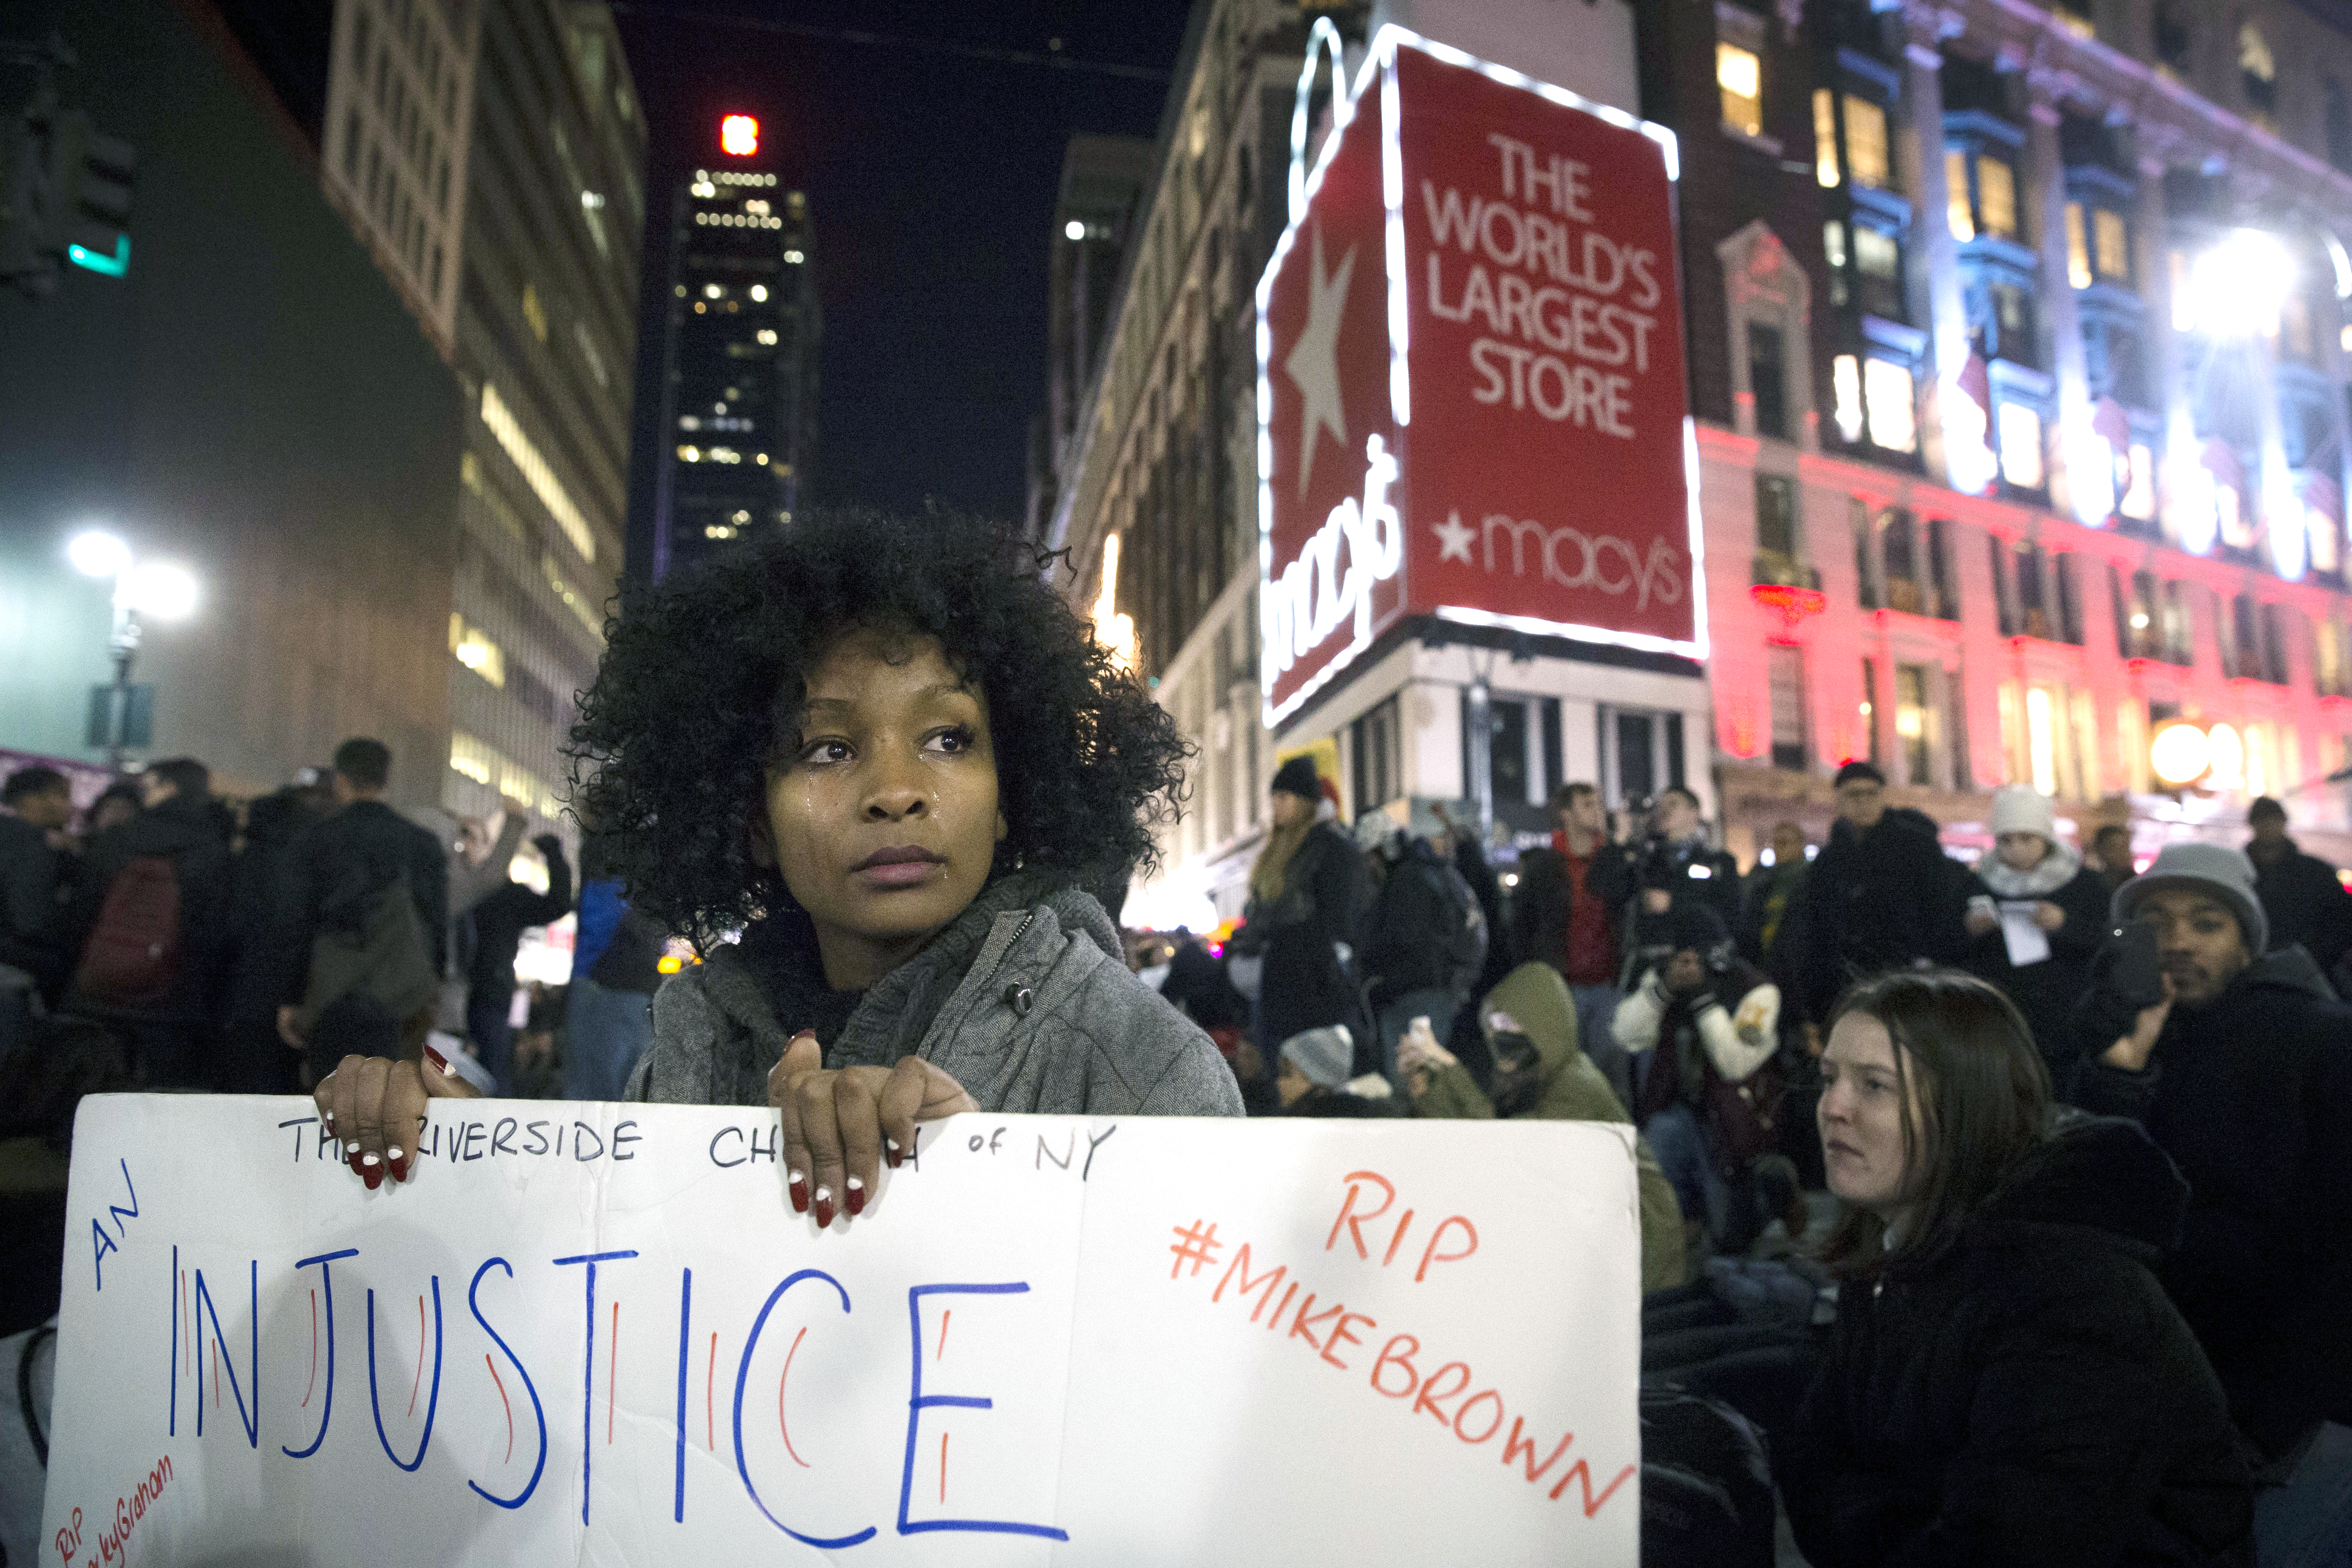 BlogHer helped give women a platform online where they could publicly discuss events like the killings of Eric Garner and Michael Brown, and the protests in Times Square that followed